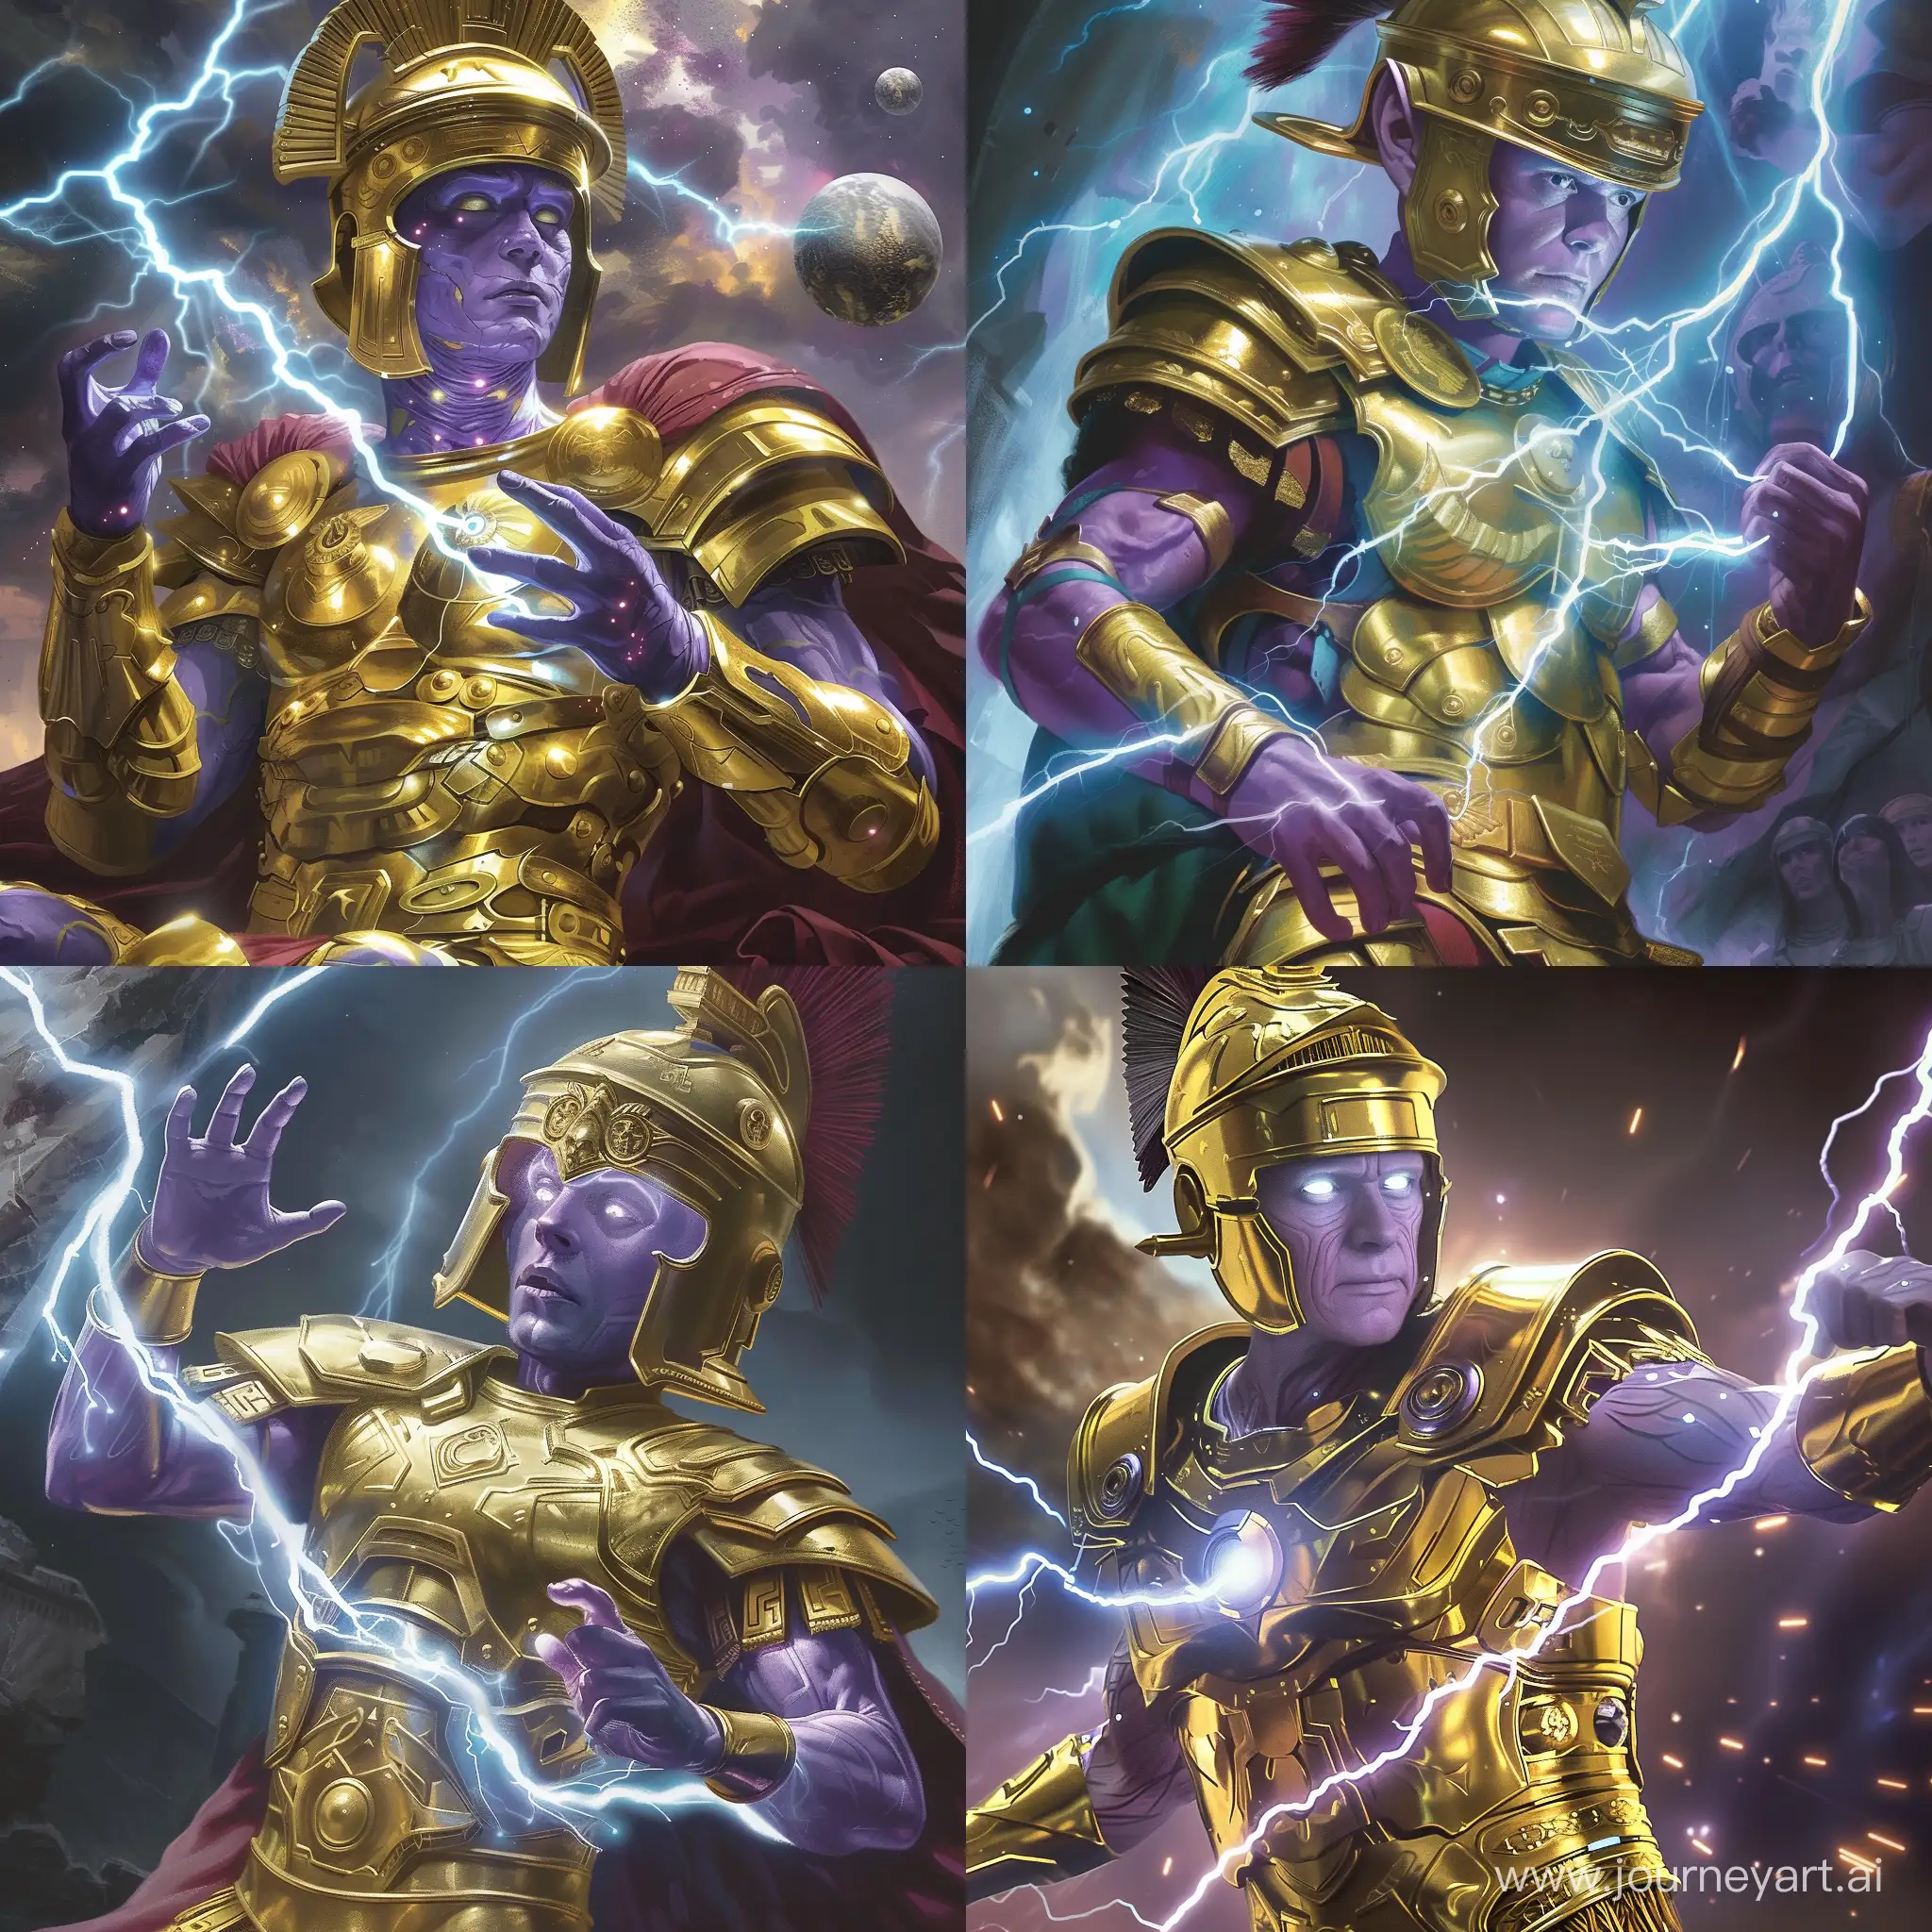 Lilac-Galactic-Hero-in-Golden-Armor-Manipulating-Electricity